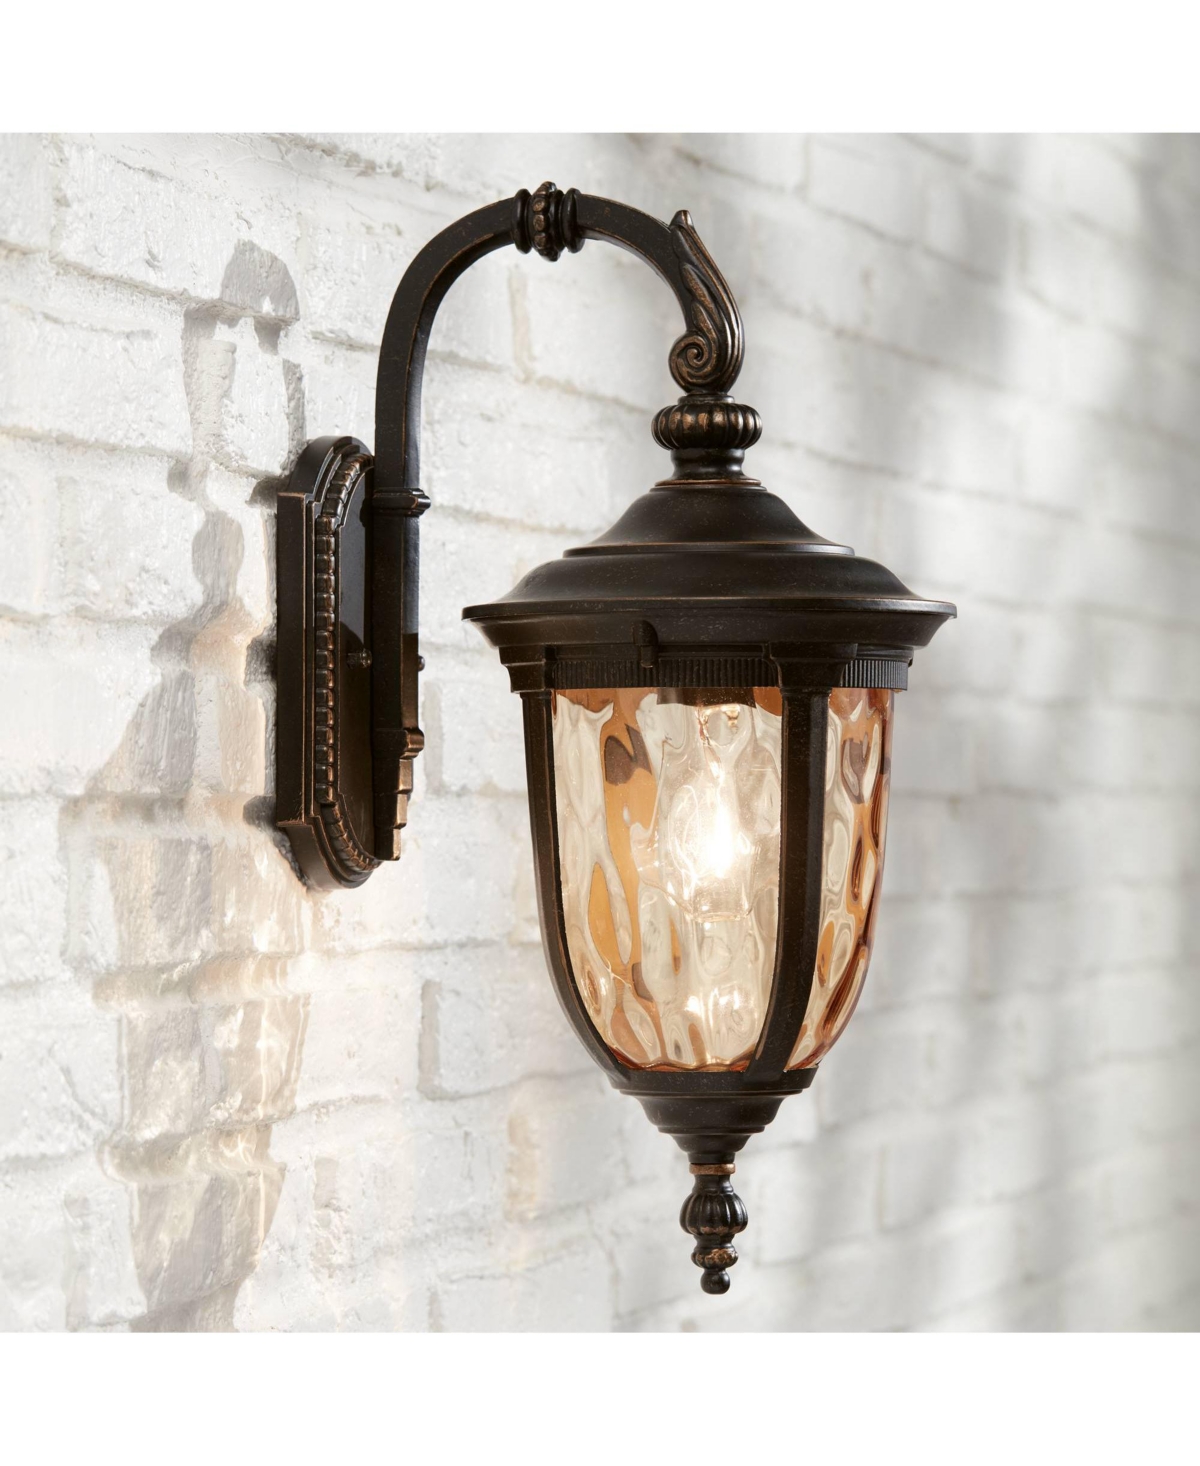 Bellagio European Outdoor Carriage Light Fixture Bronze Metal 16 1/2" Hammered Glass Wall Sconce for Exterior House Porch Patio Outside Deck Garage Ya